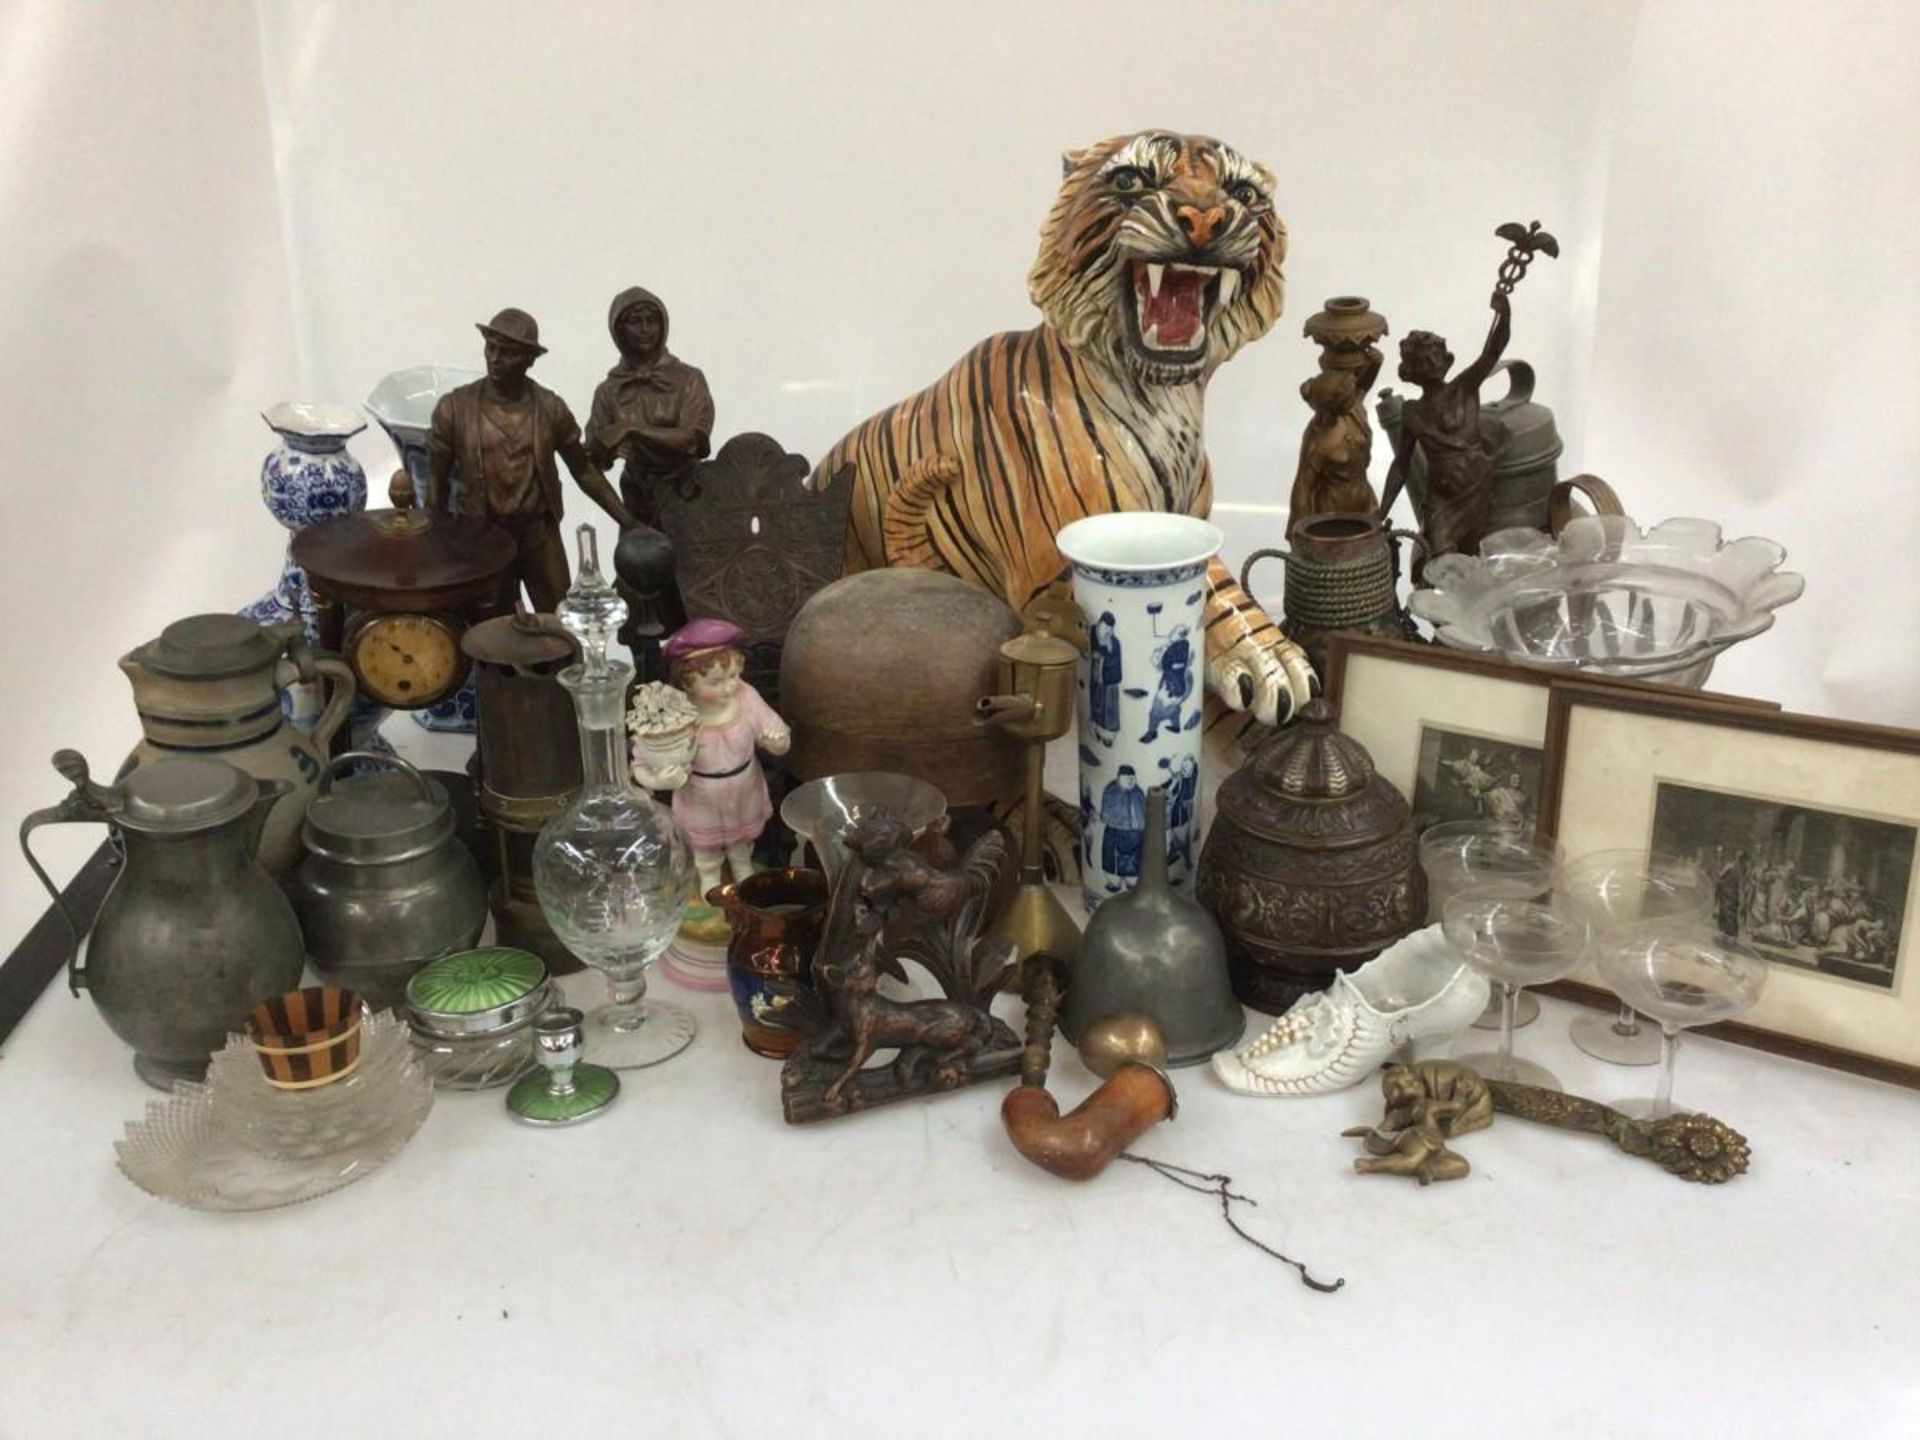 A large lot consisting of a glazed tiger (with damage), gourd vases, etchings, pewter and stonework.